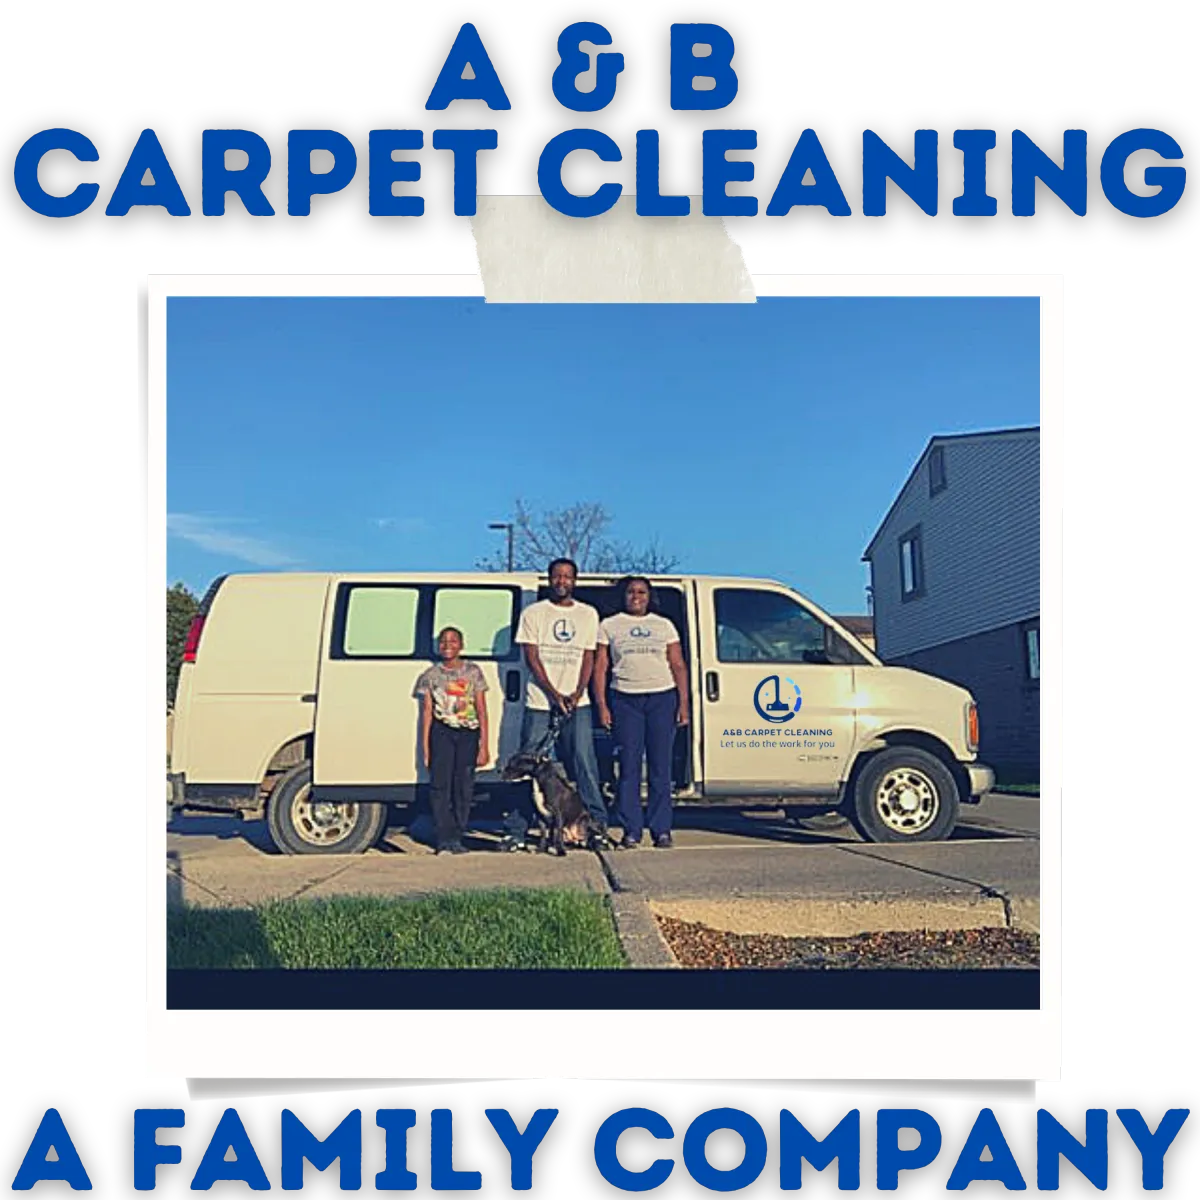 Stanley - Elite Carpet Cleaning Pro's Owner - Carpet Cleaning